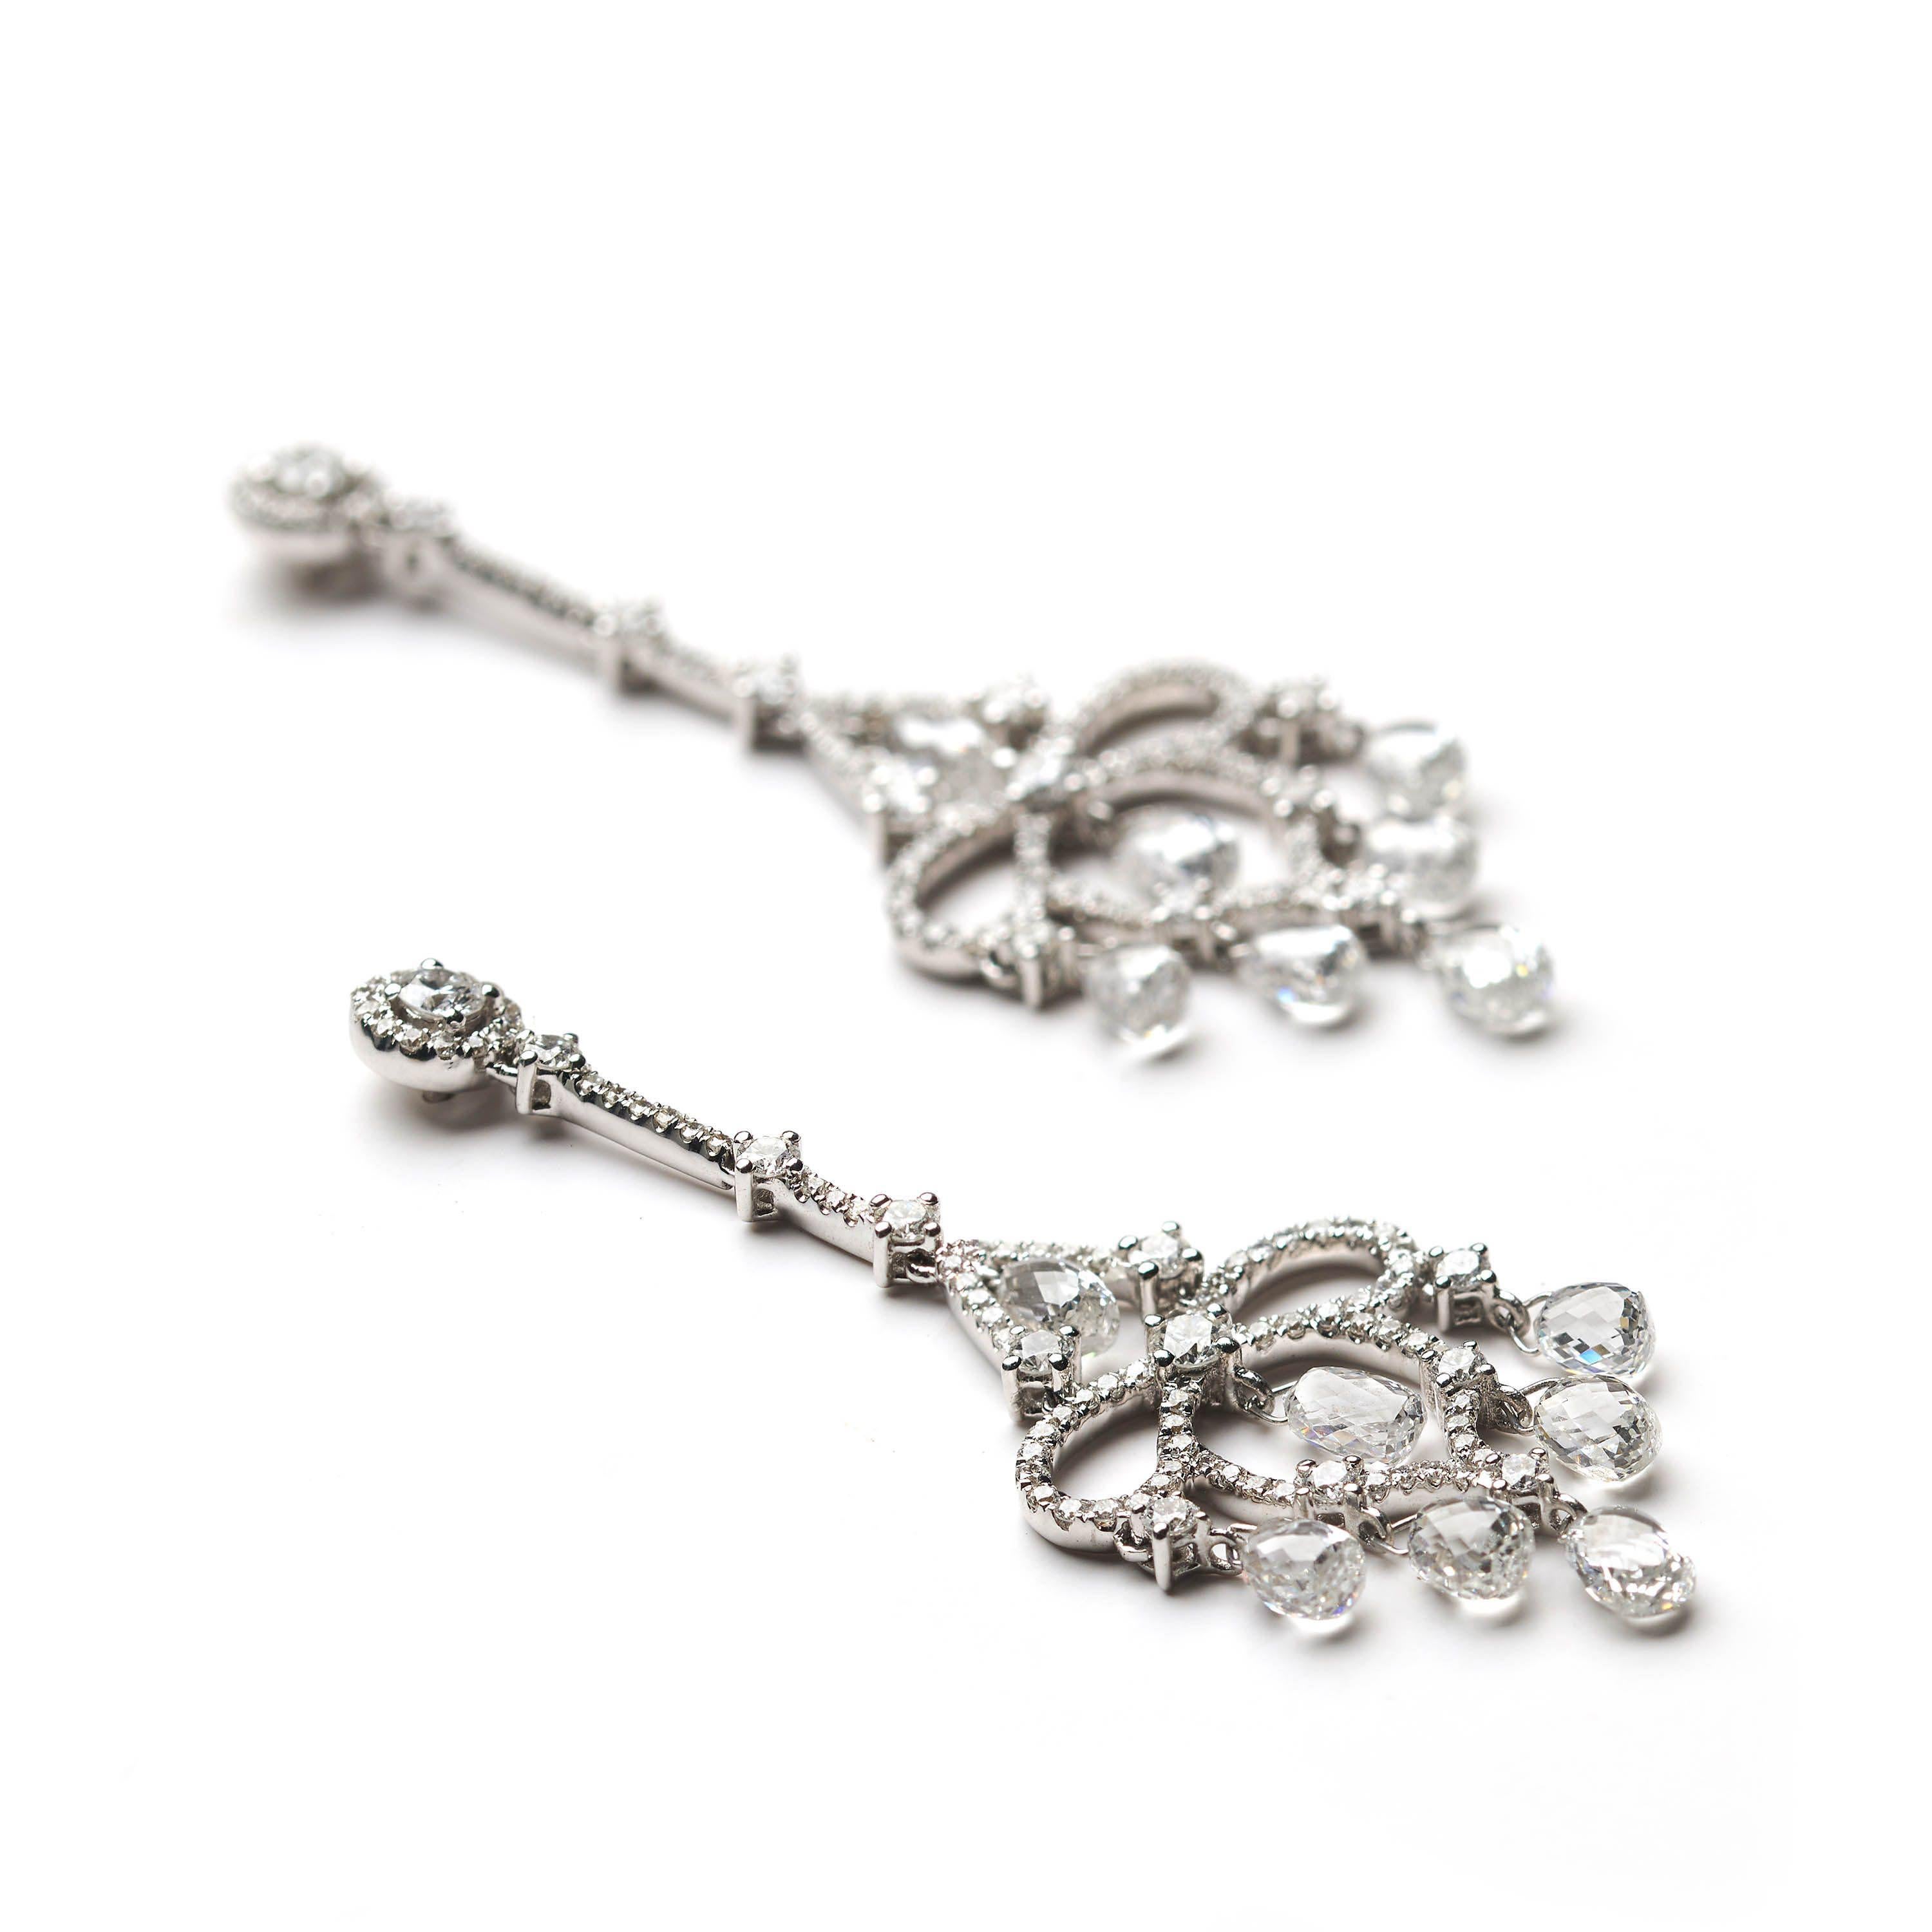 Briolette Cut Modern Briolette Diamond And White Gold Drop Earrings, 7.23 Carats For Sale